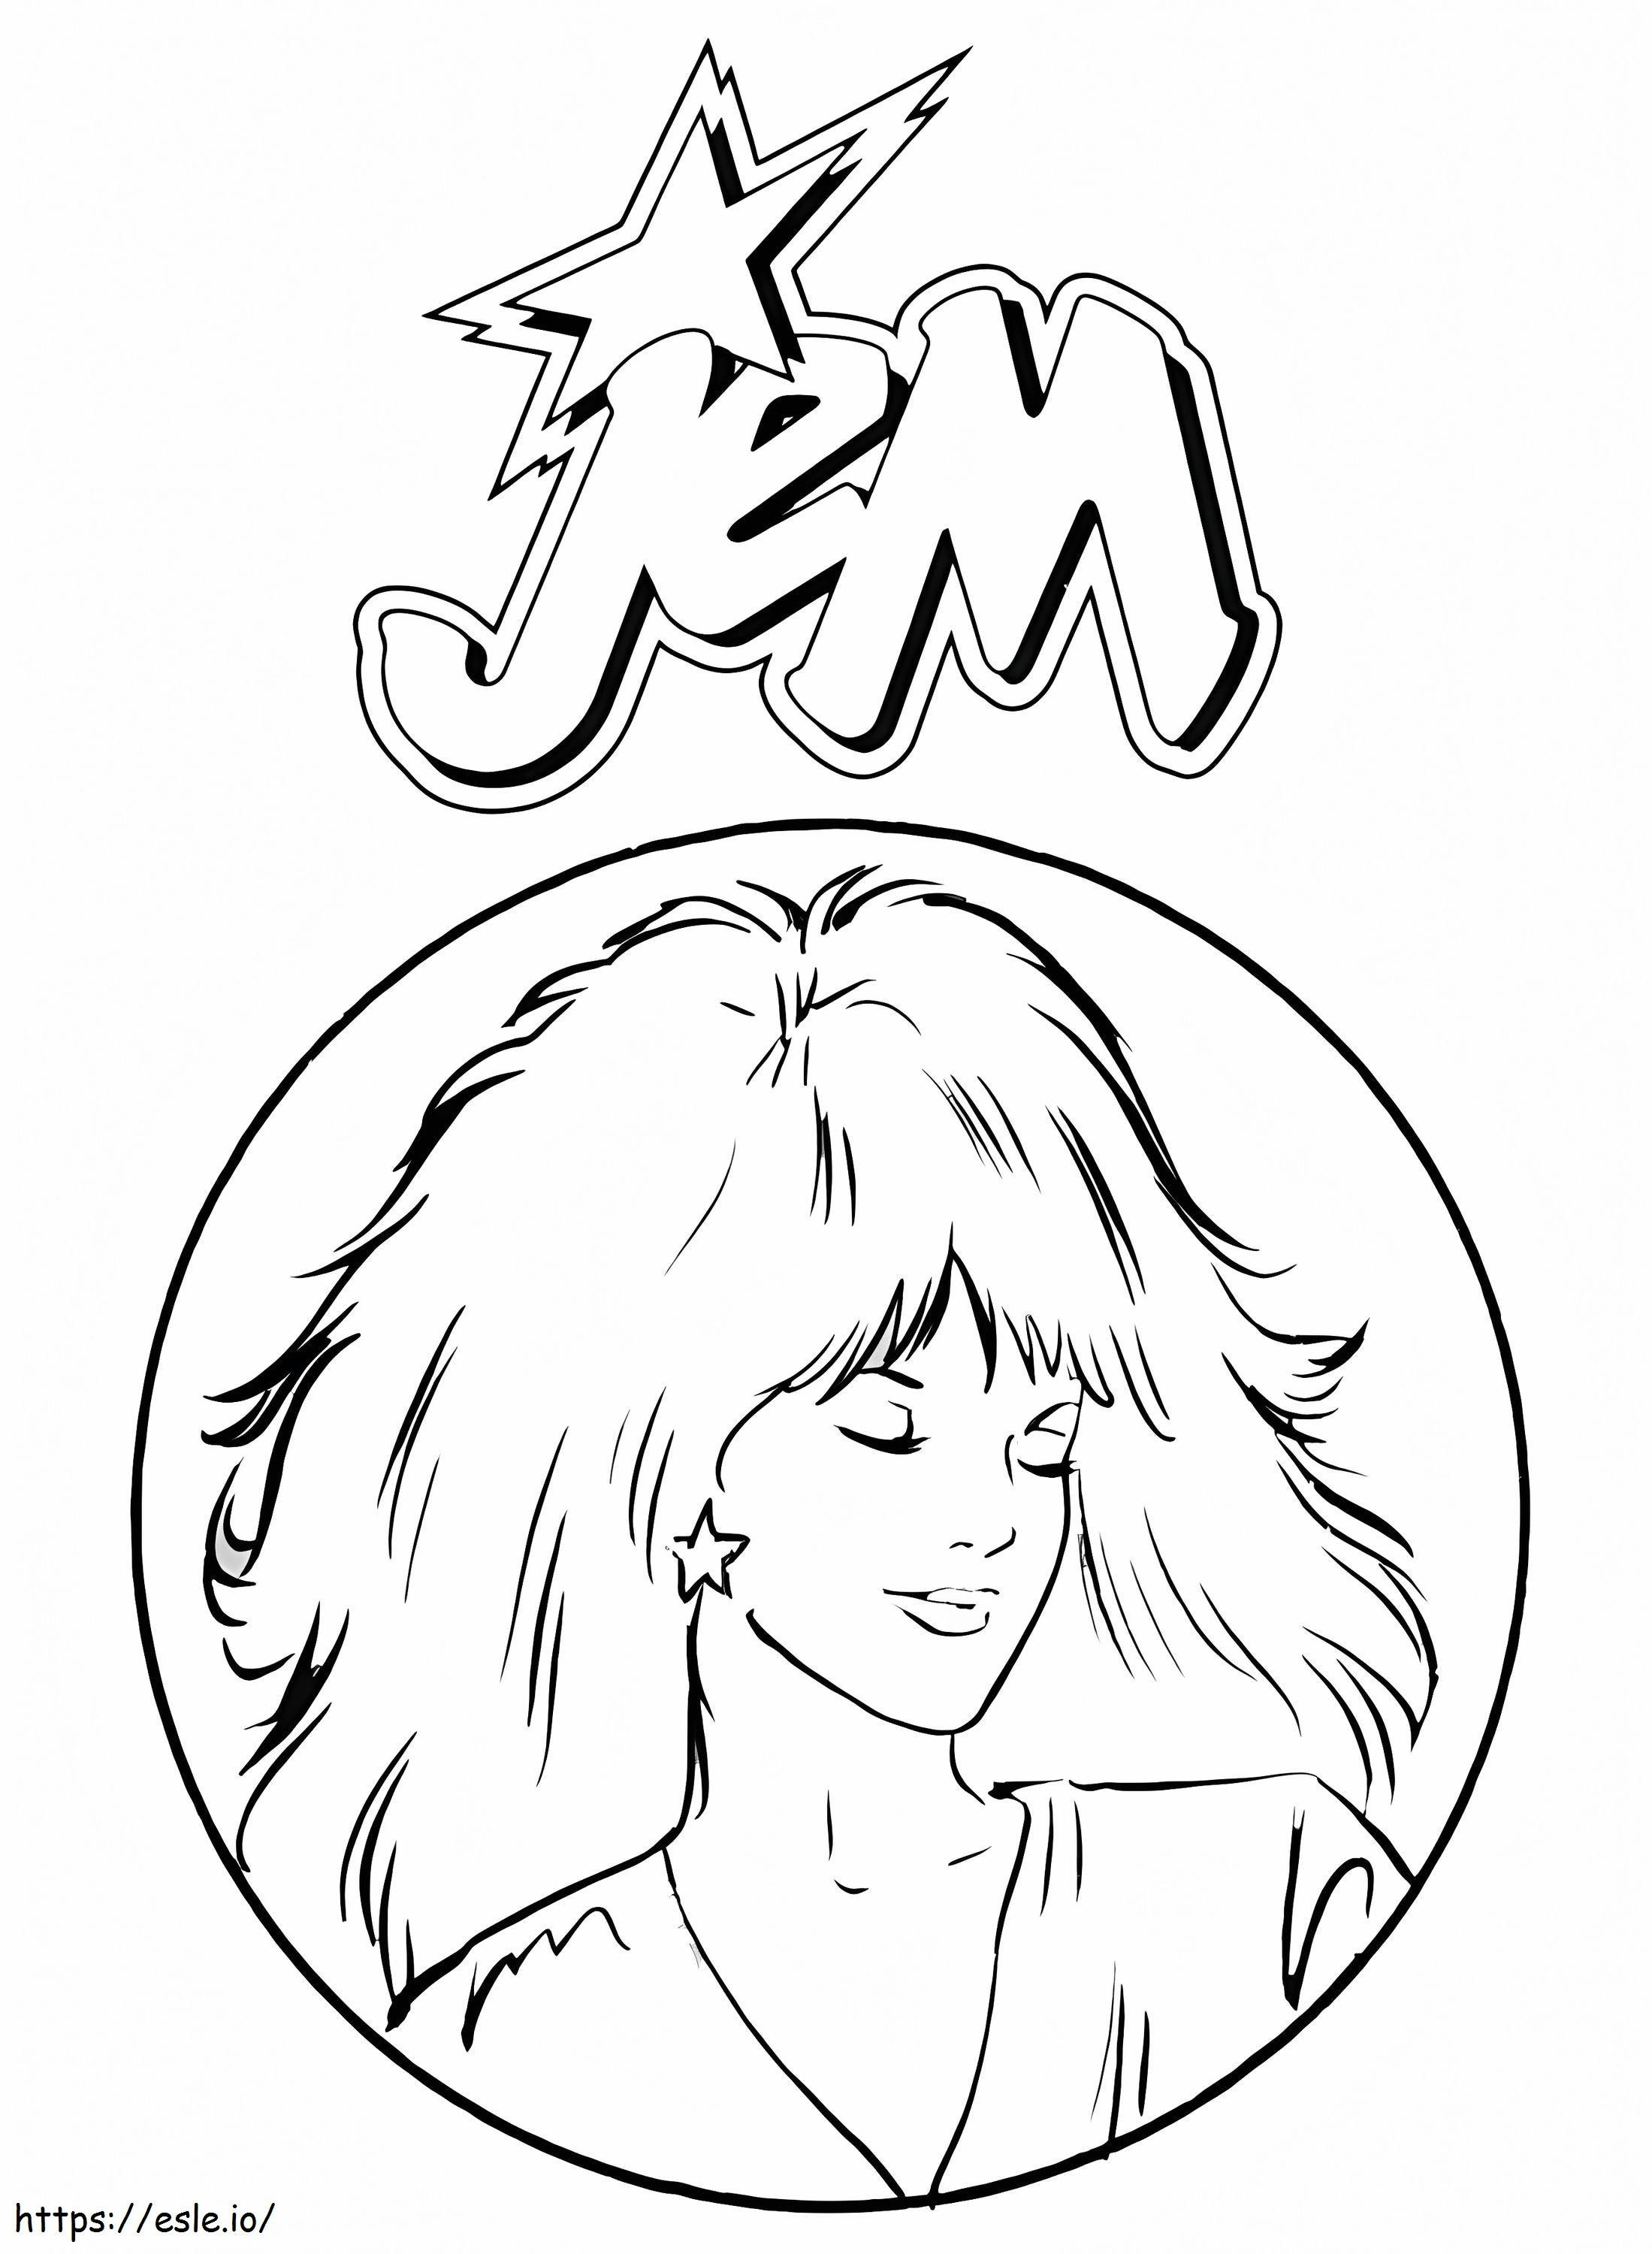 Character Jem coloring page